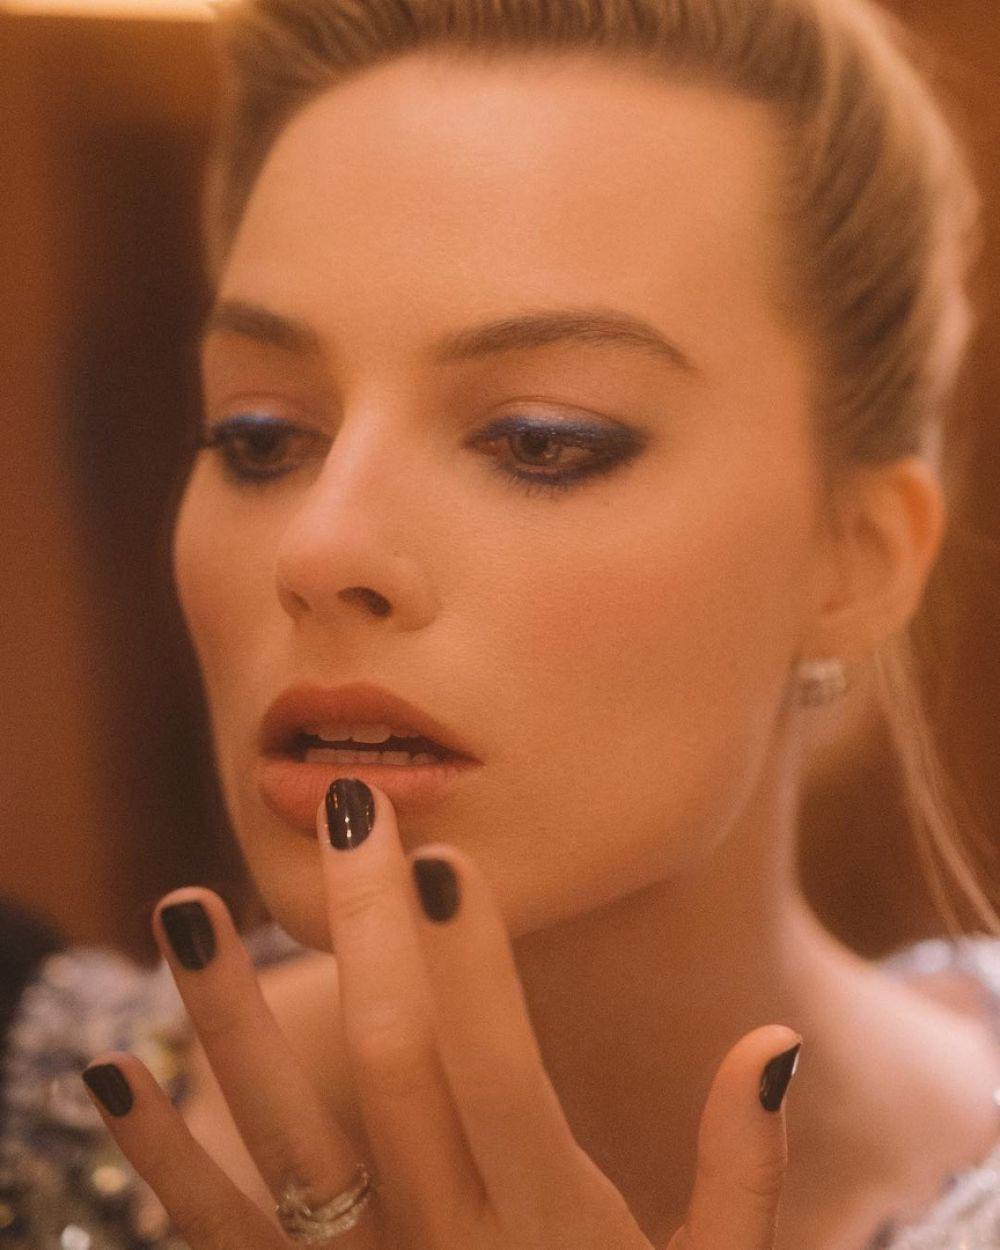 Anybody down to chat about or roleplay as Margot Robbie for me?